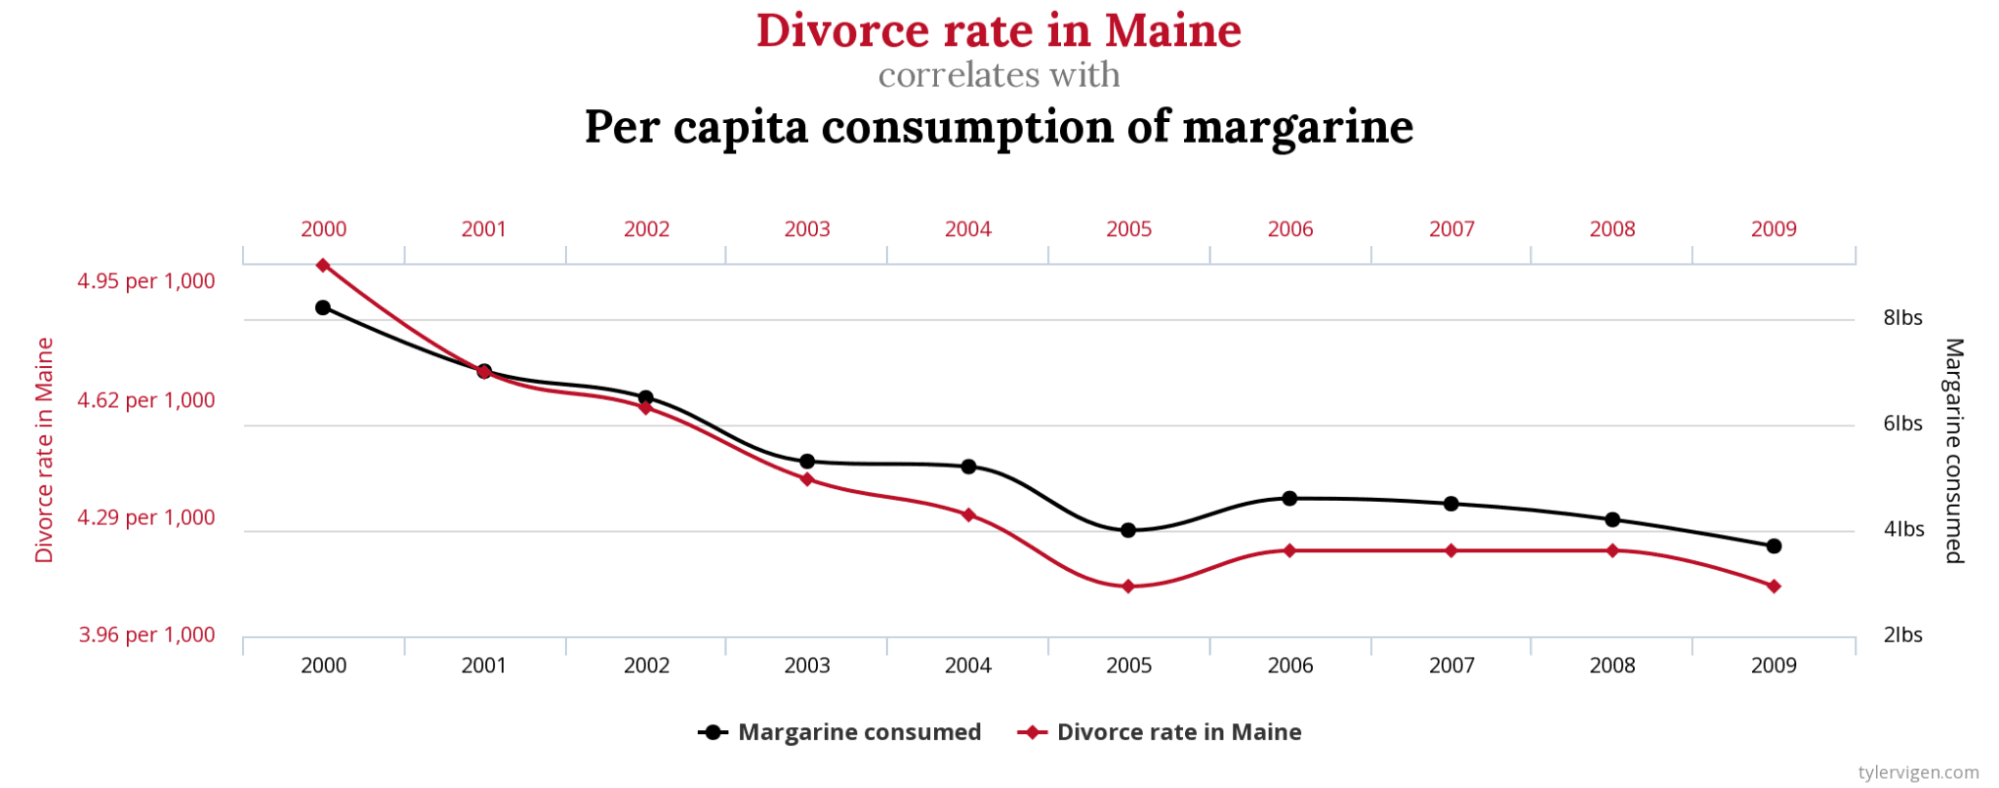 divorce rate in the US state of Maine